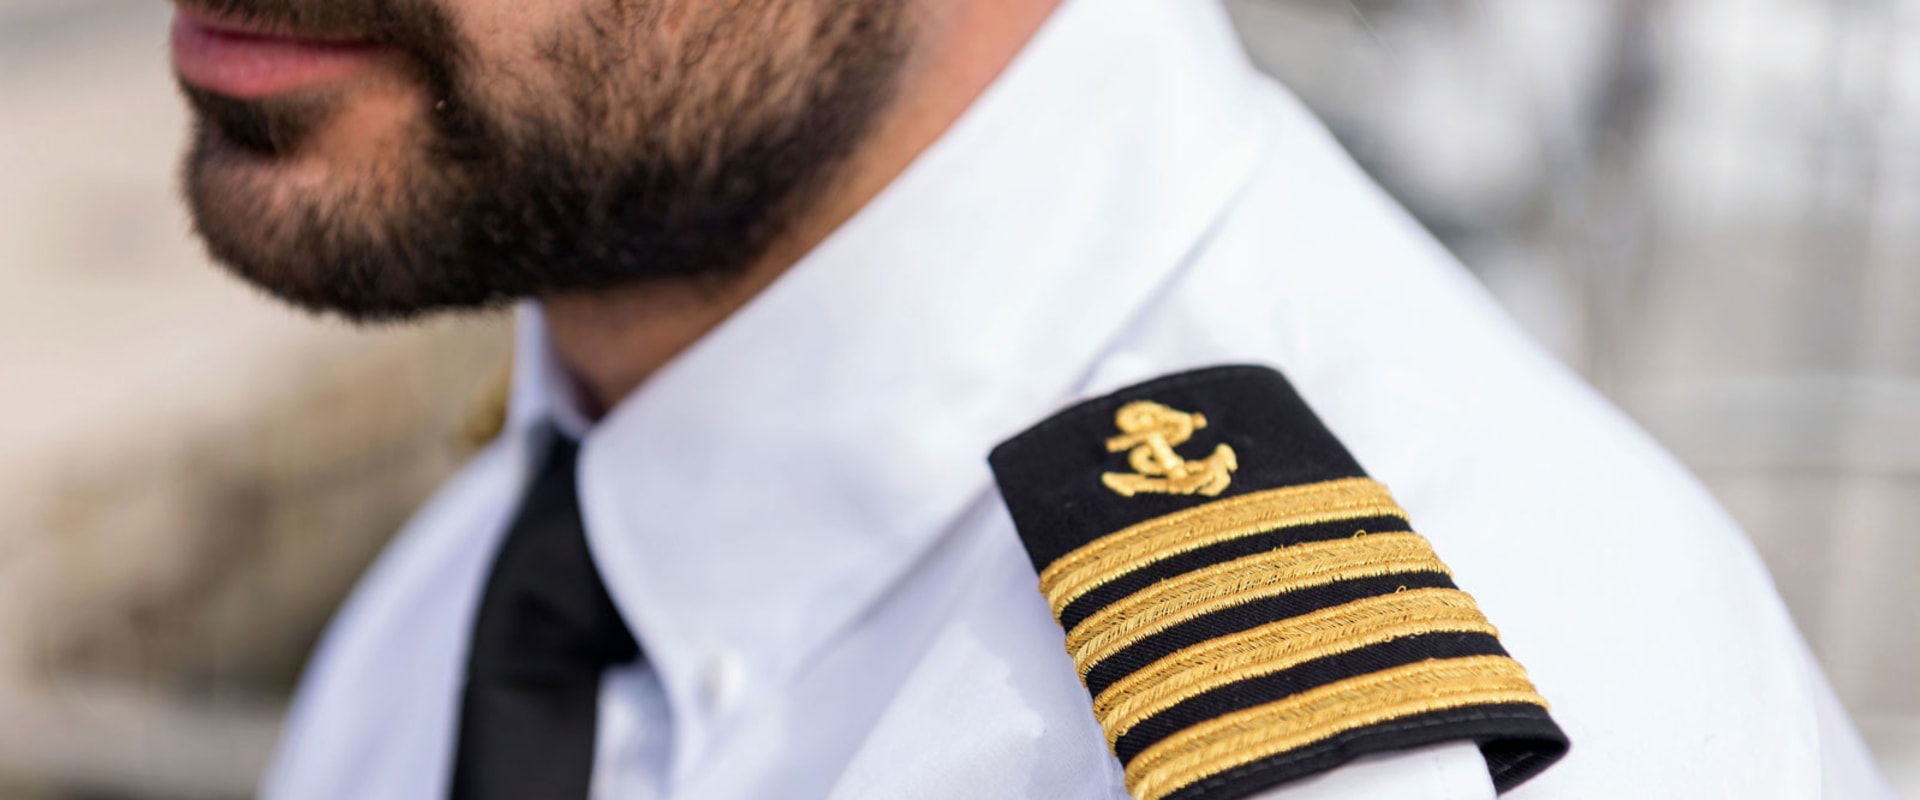 What do charter boat captains wear?